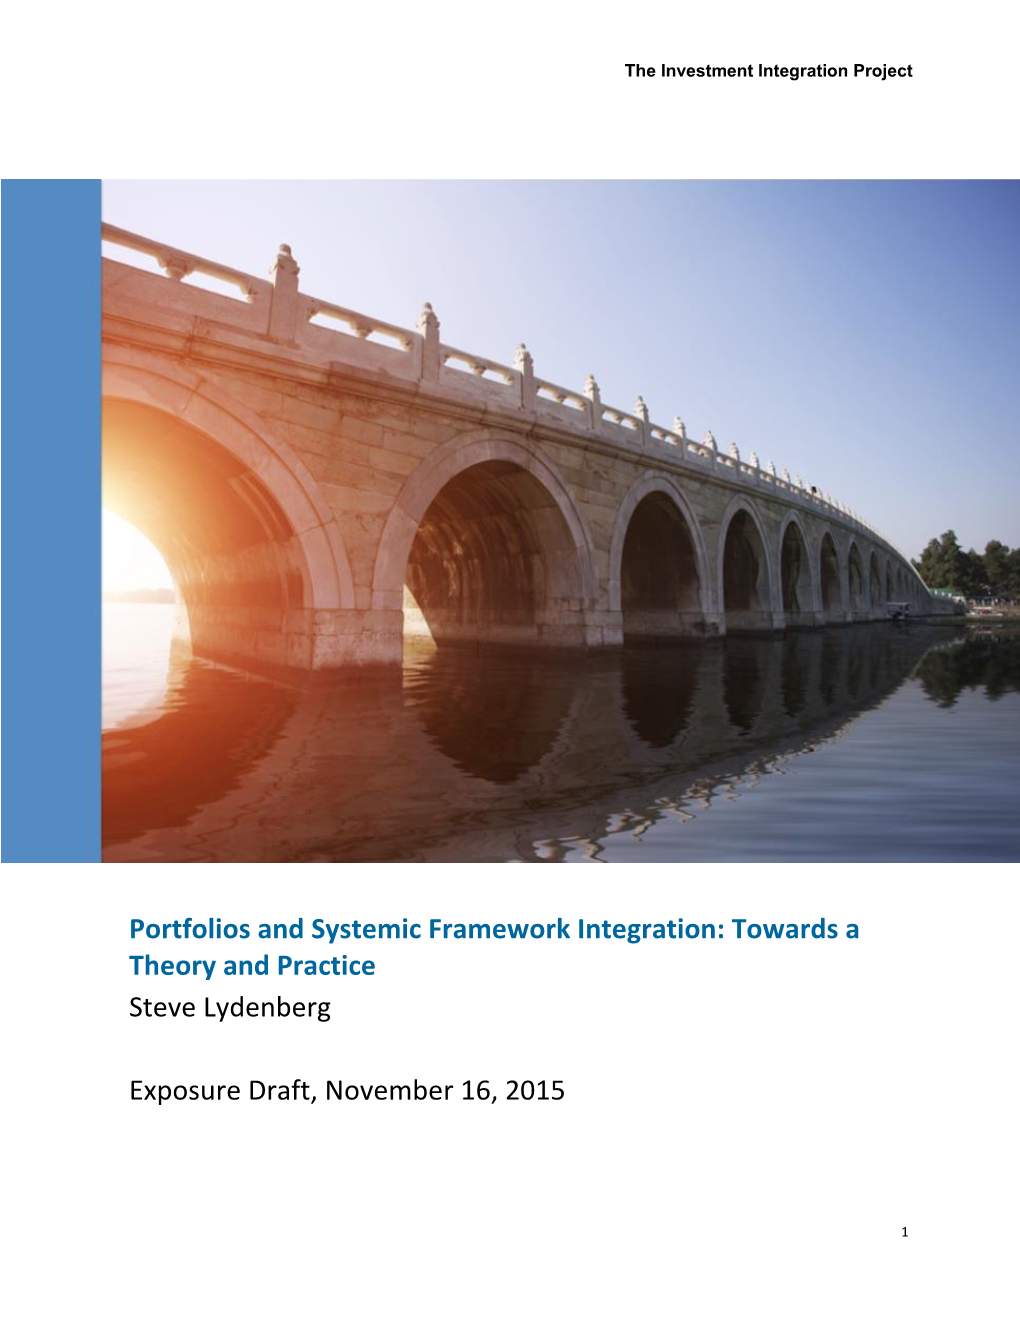 Portfolios and Systemic Framework Integration: Towards a Theory and Practice Steve Lydenberg